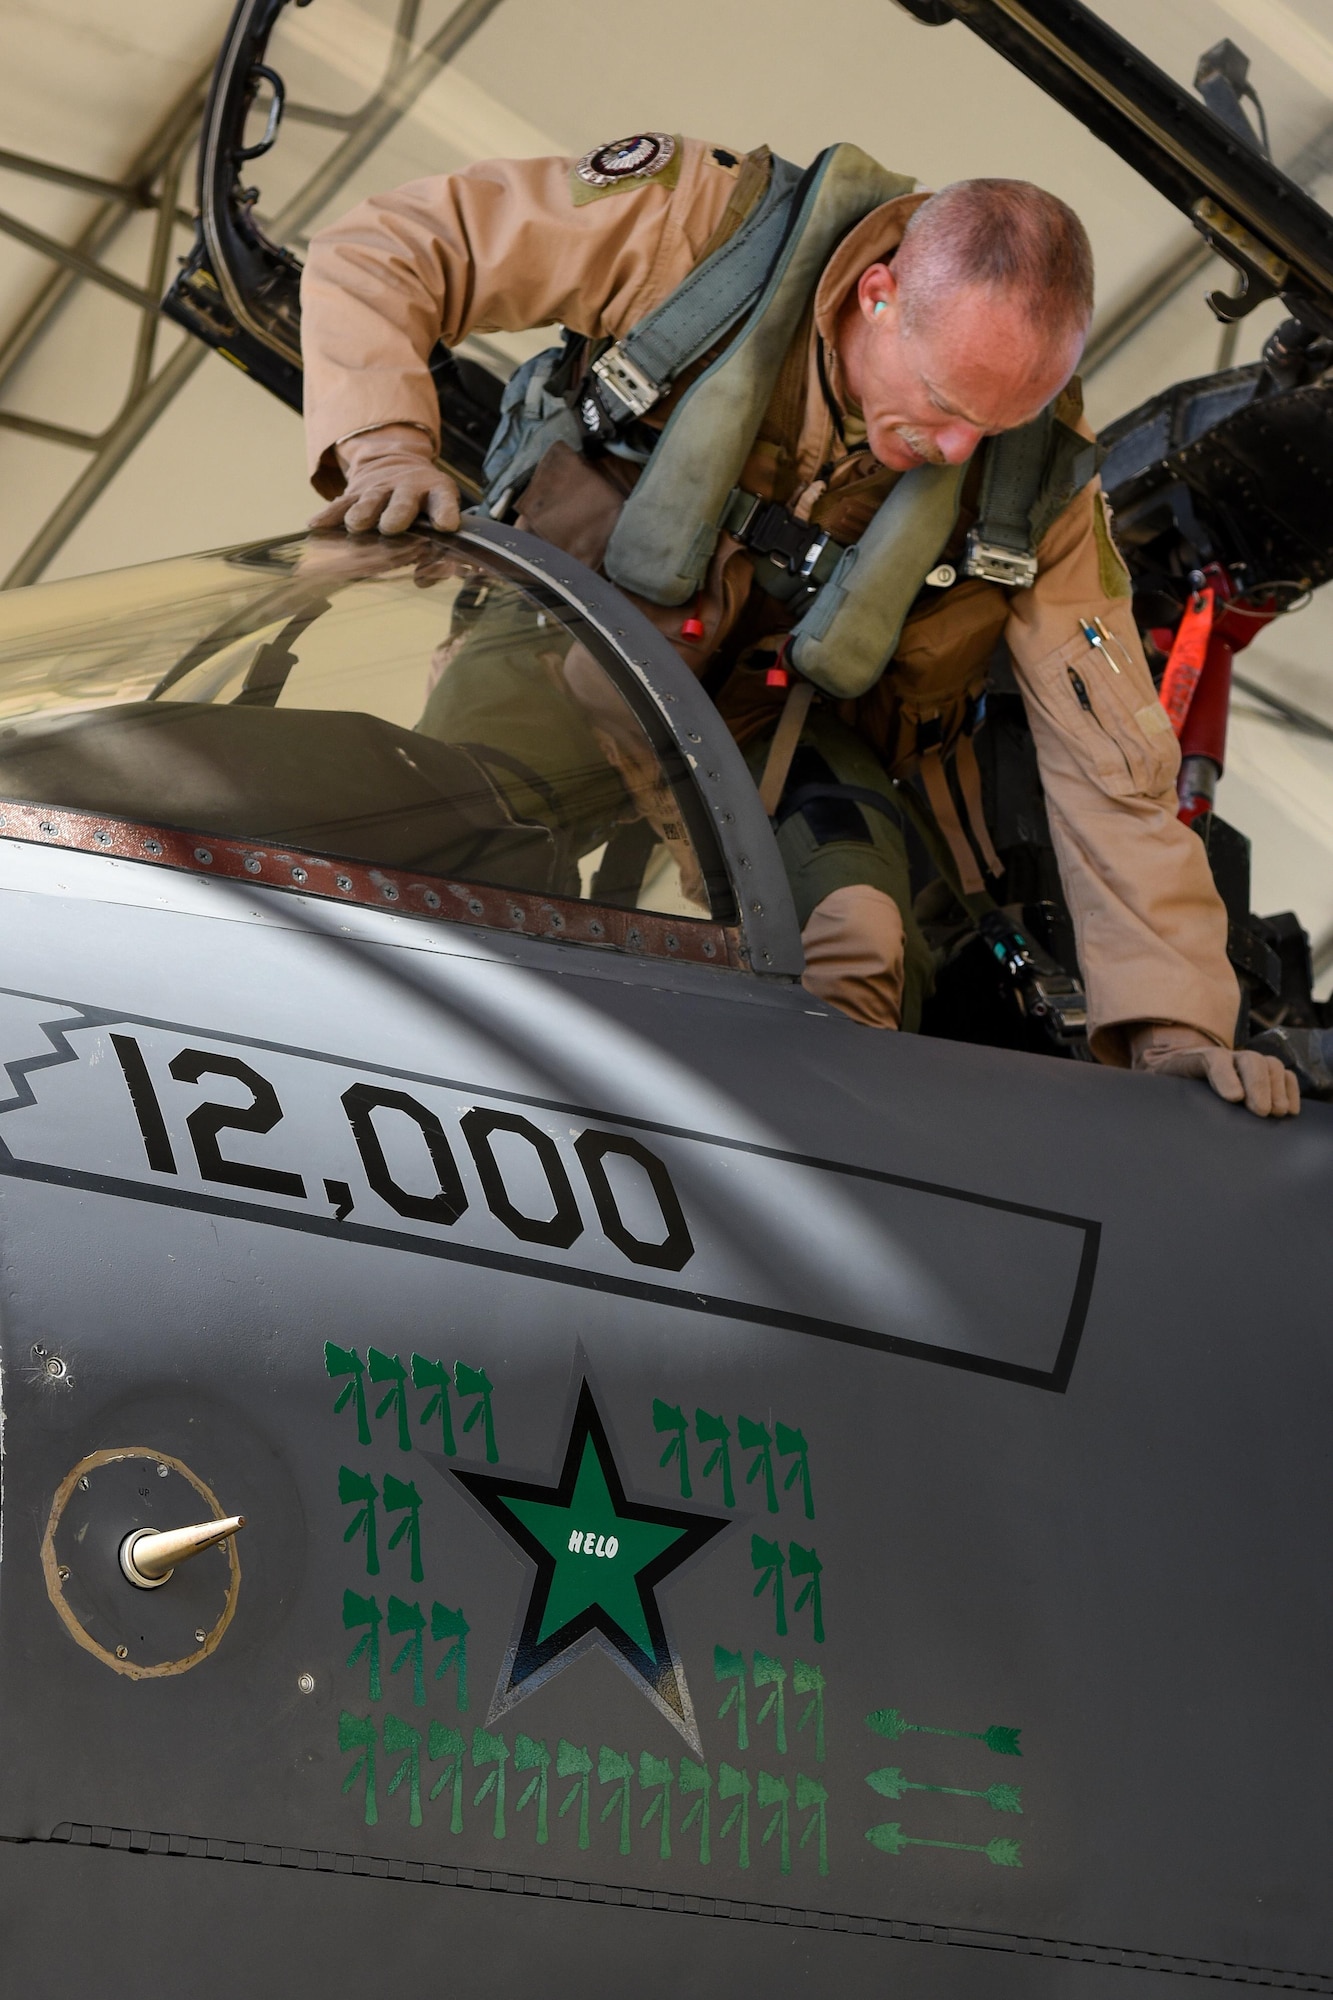 Lt Col. Brandon Johnson, 335th Fighter Squadron commander, disembarks an F-15E Strike Eagle after returning from deployment, Oct. 12, 2016, at Seymour Johnson Air Force Base, North Carolina. During the deployment, Johnson’s aircraft reached its 12,000 flight hour milestone on Aug. 16, while Johnson also recorded his 3,000th flight hour during the same sortie. (U.S. Air Force photo by Airman Shawna L. Keyes)